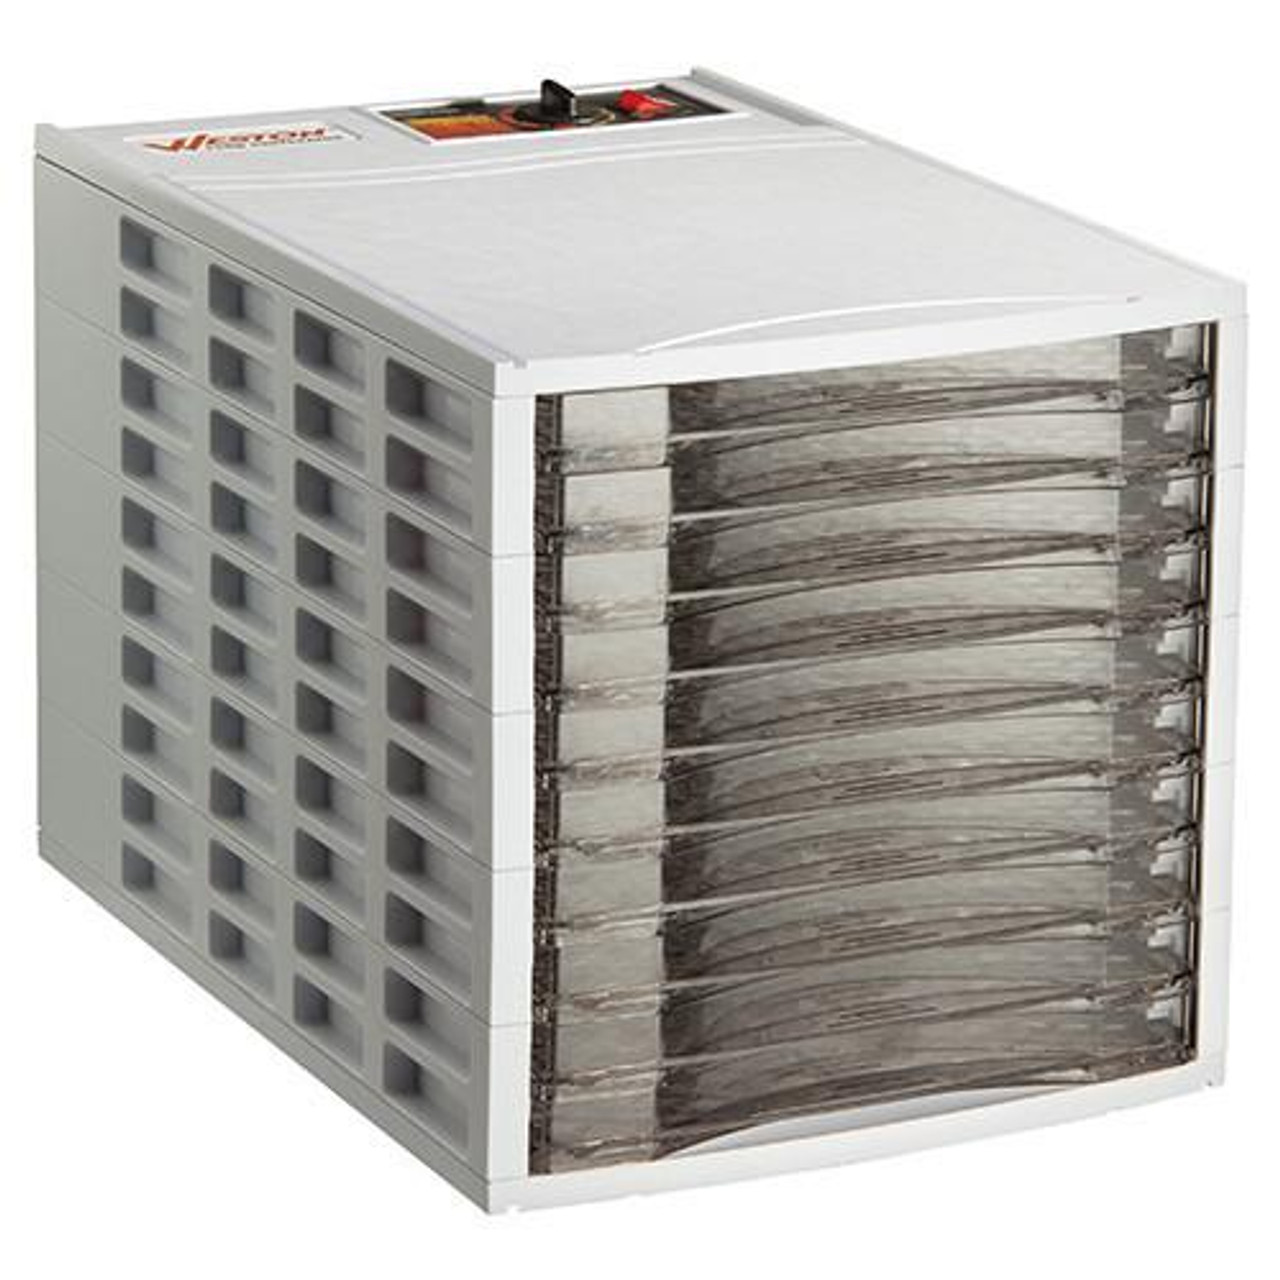 Stainless Steel Food Dehydrator 10-tray by Weston Food Dehydrator Stainless  Steel [74-1001-W] - $318.99 : Homesteader's Supply